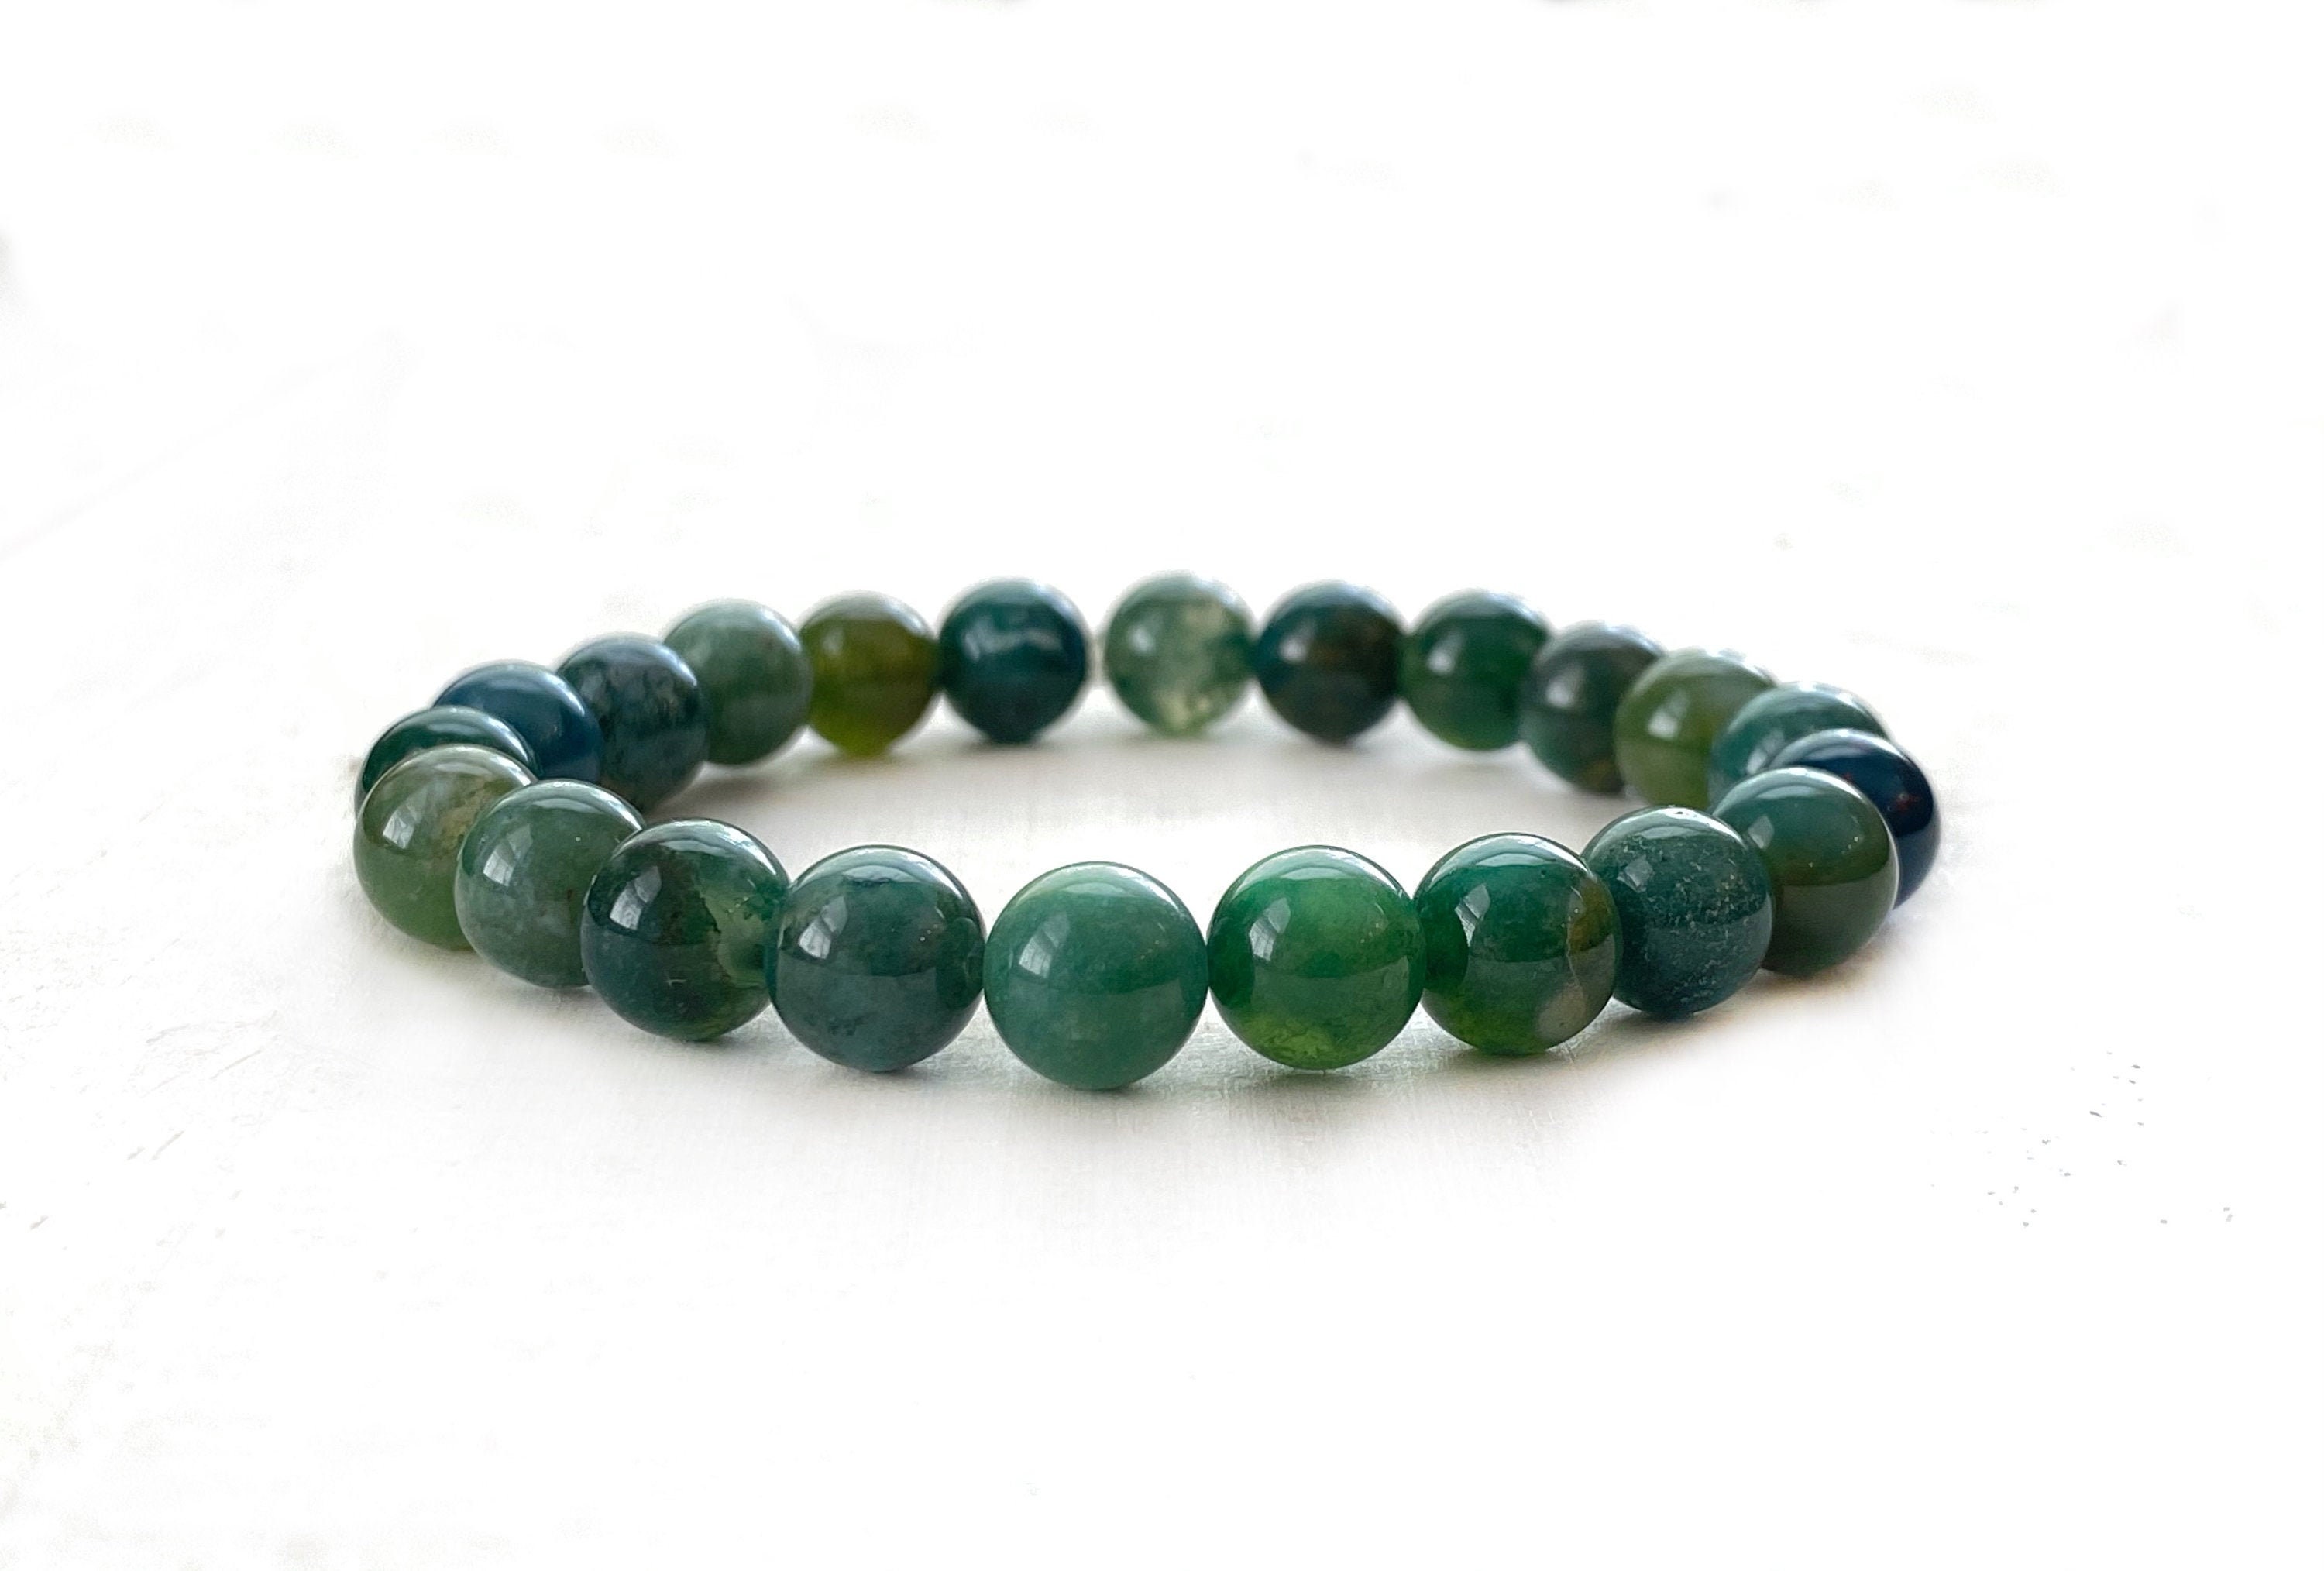 MOSS AGATE - Soothes Emotional Wounds - Mala Bead Bracelet - Stretch ...